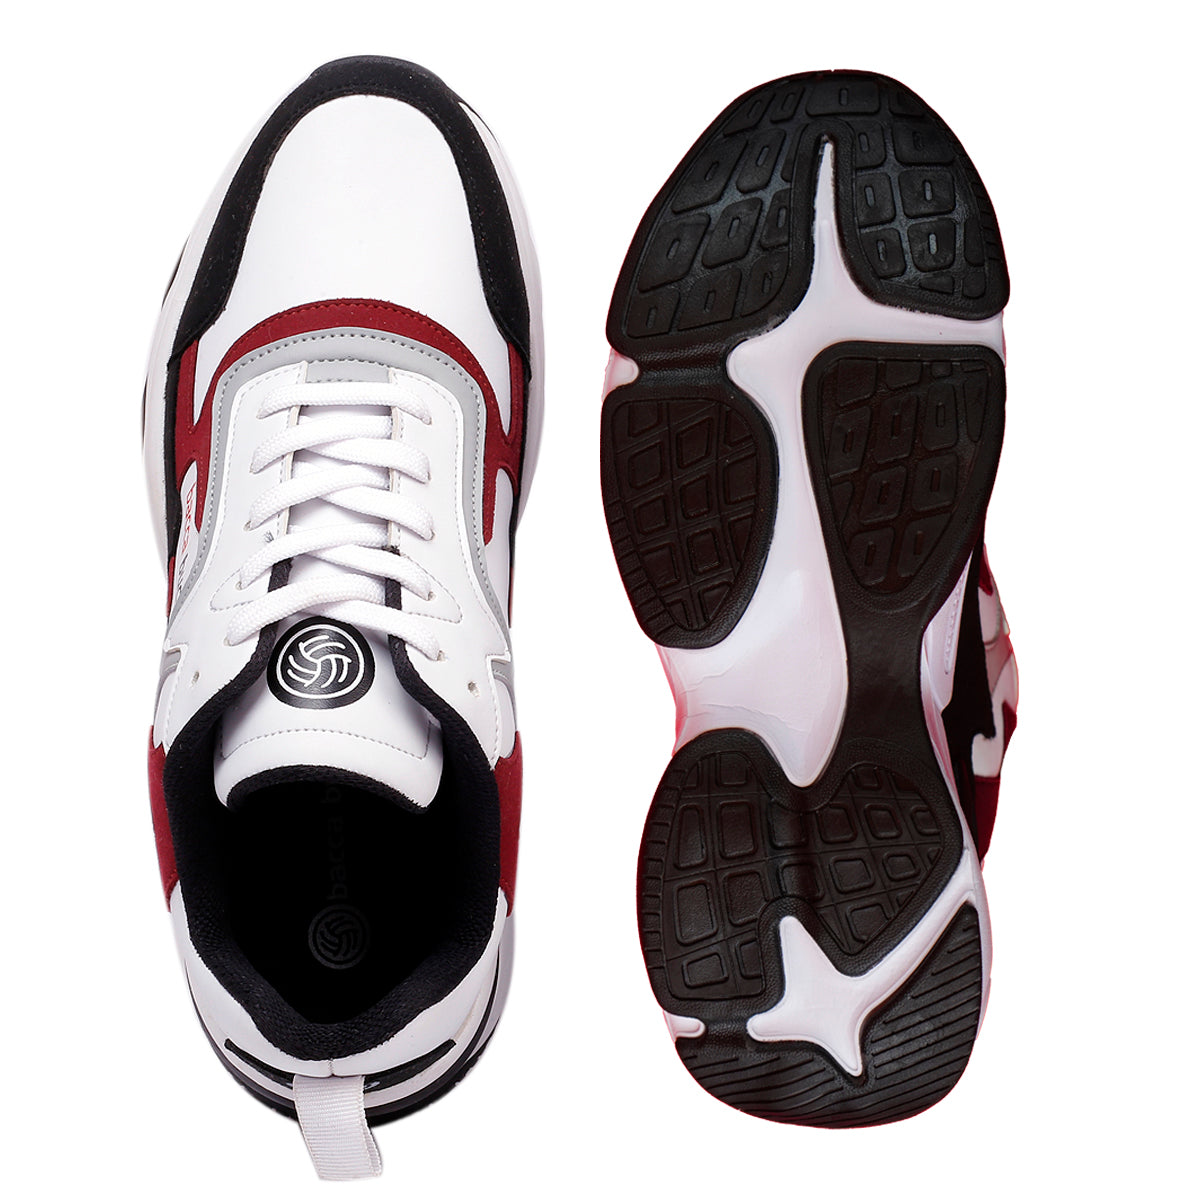 Bacca Bucci SPARK Trainers for Men